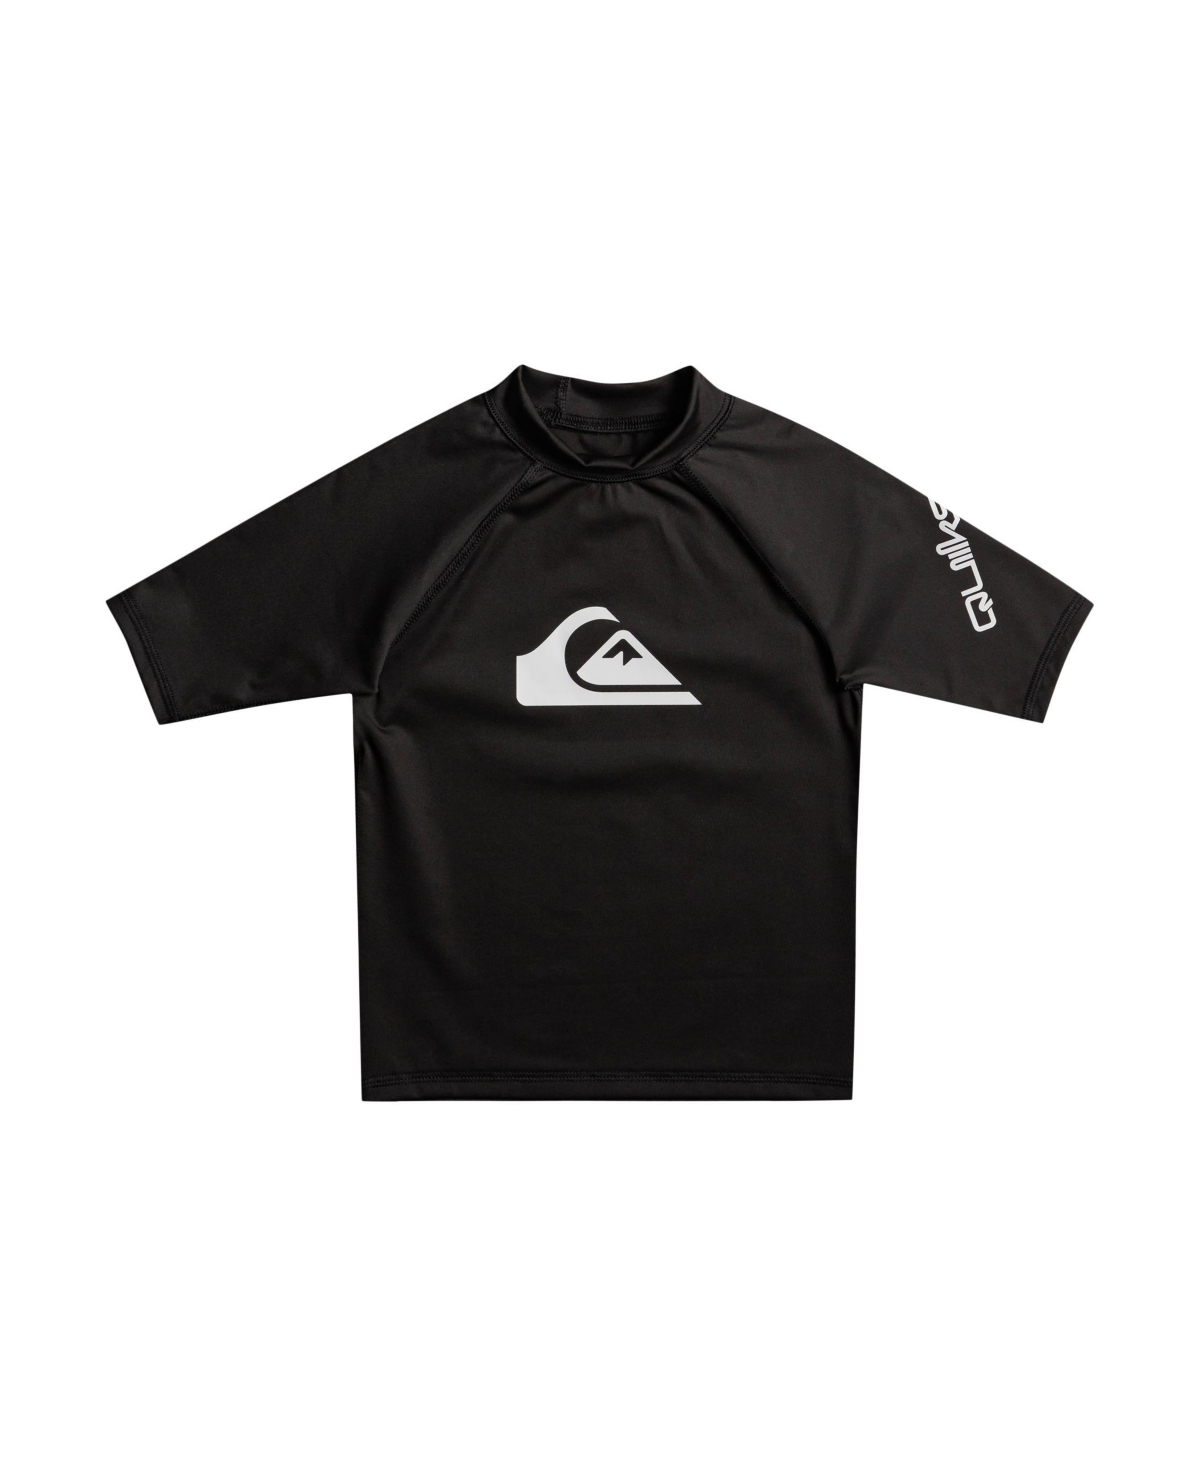 Quiksilver Toddler Boys All Time Short Sleeve Rash Guard In Black